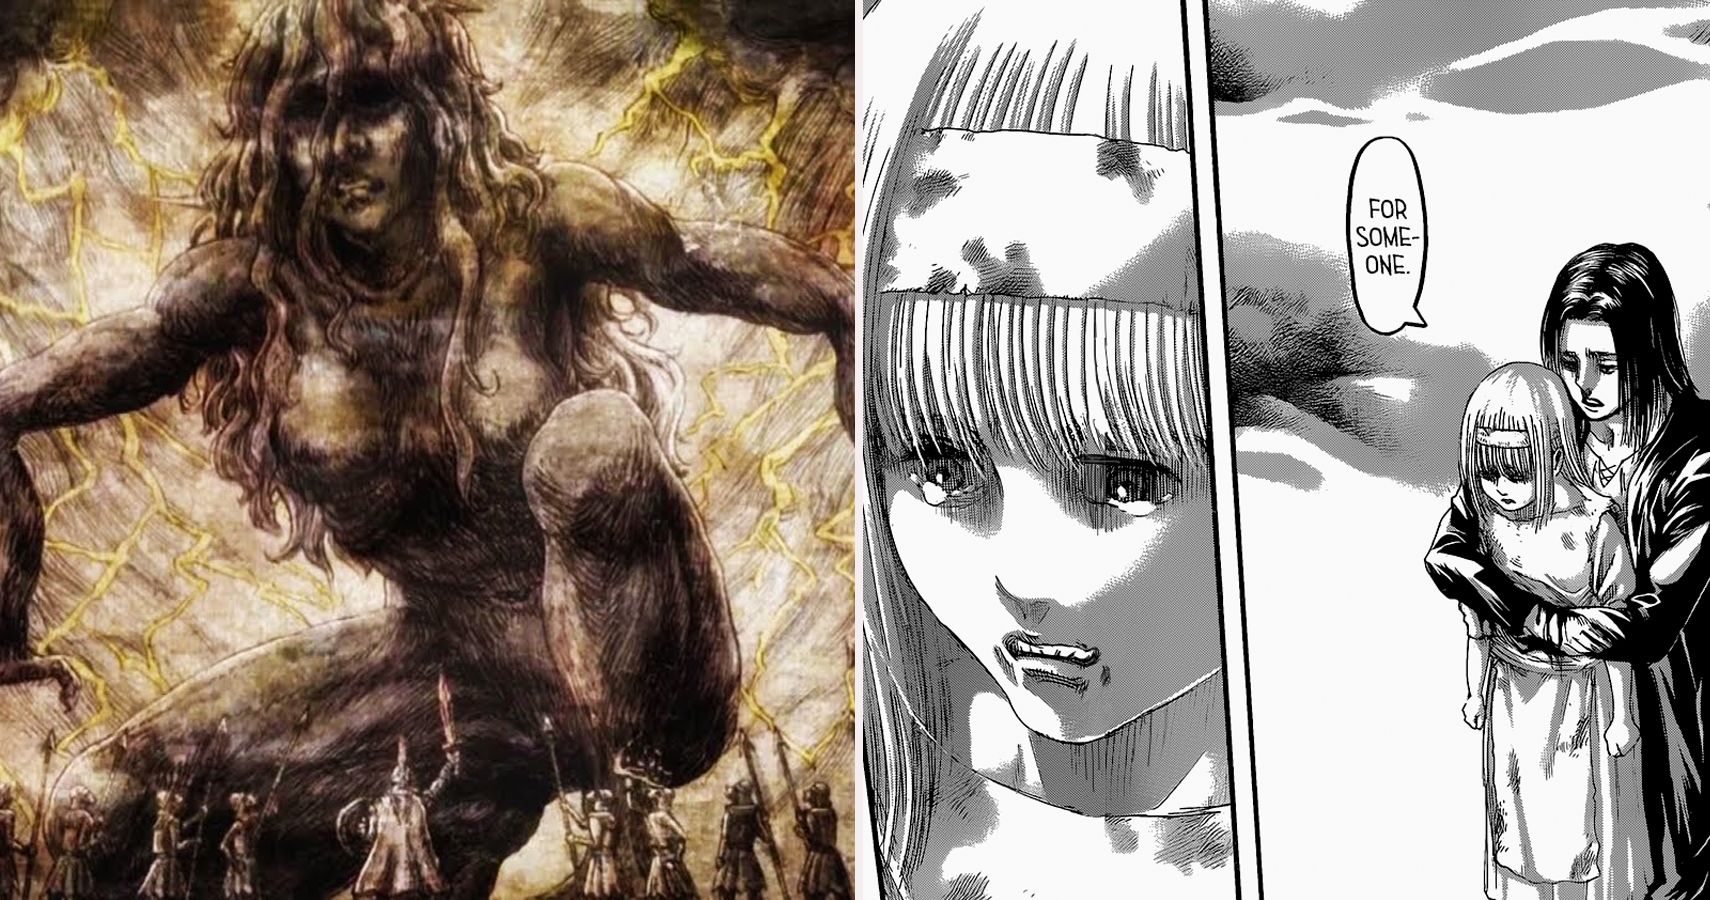 Attack On Titan 10 Interesting Facts About Ymir Fritz You Need To Know Yep, eren founding titan is taller than colossal. attack on titan 10 interesting facts